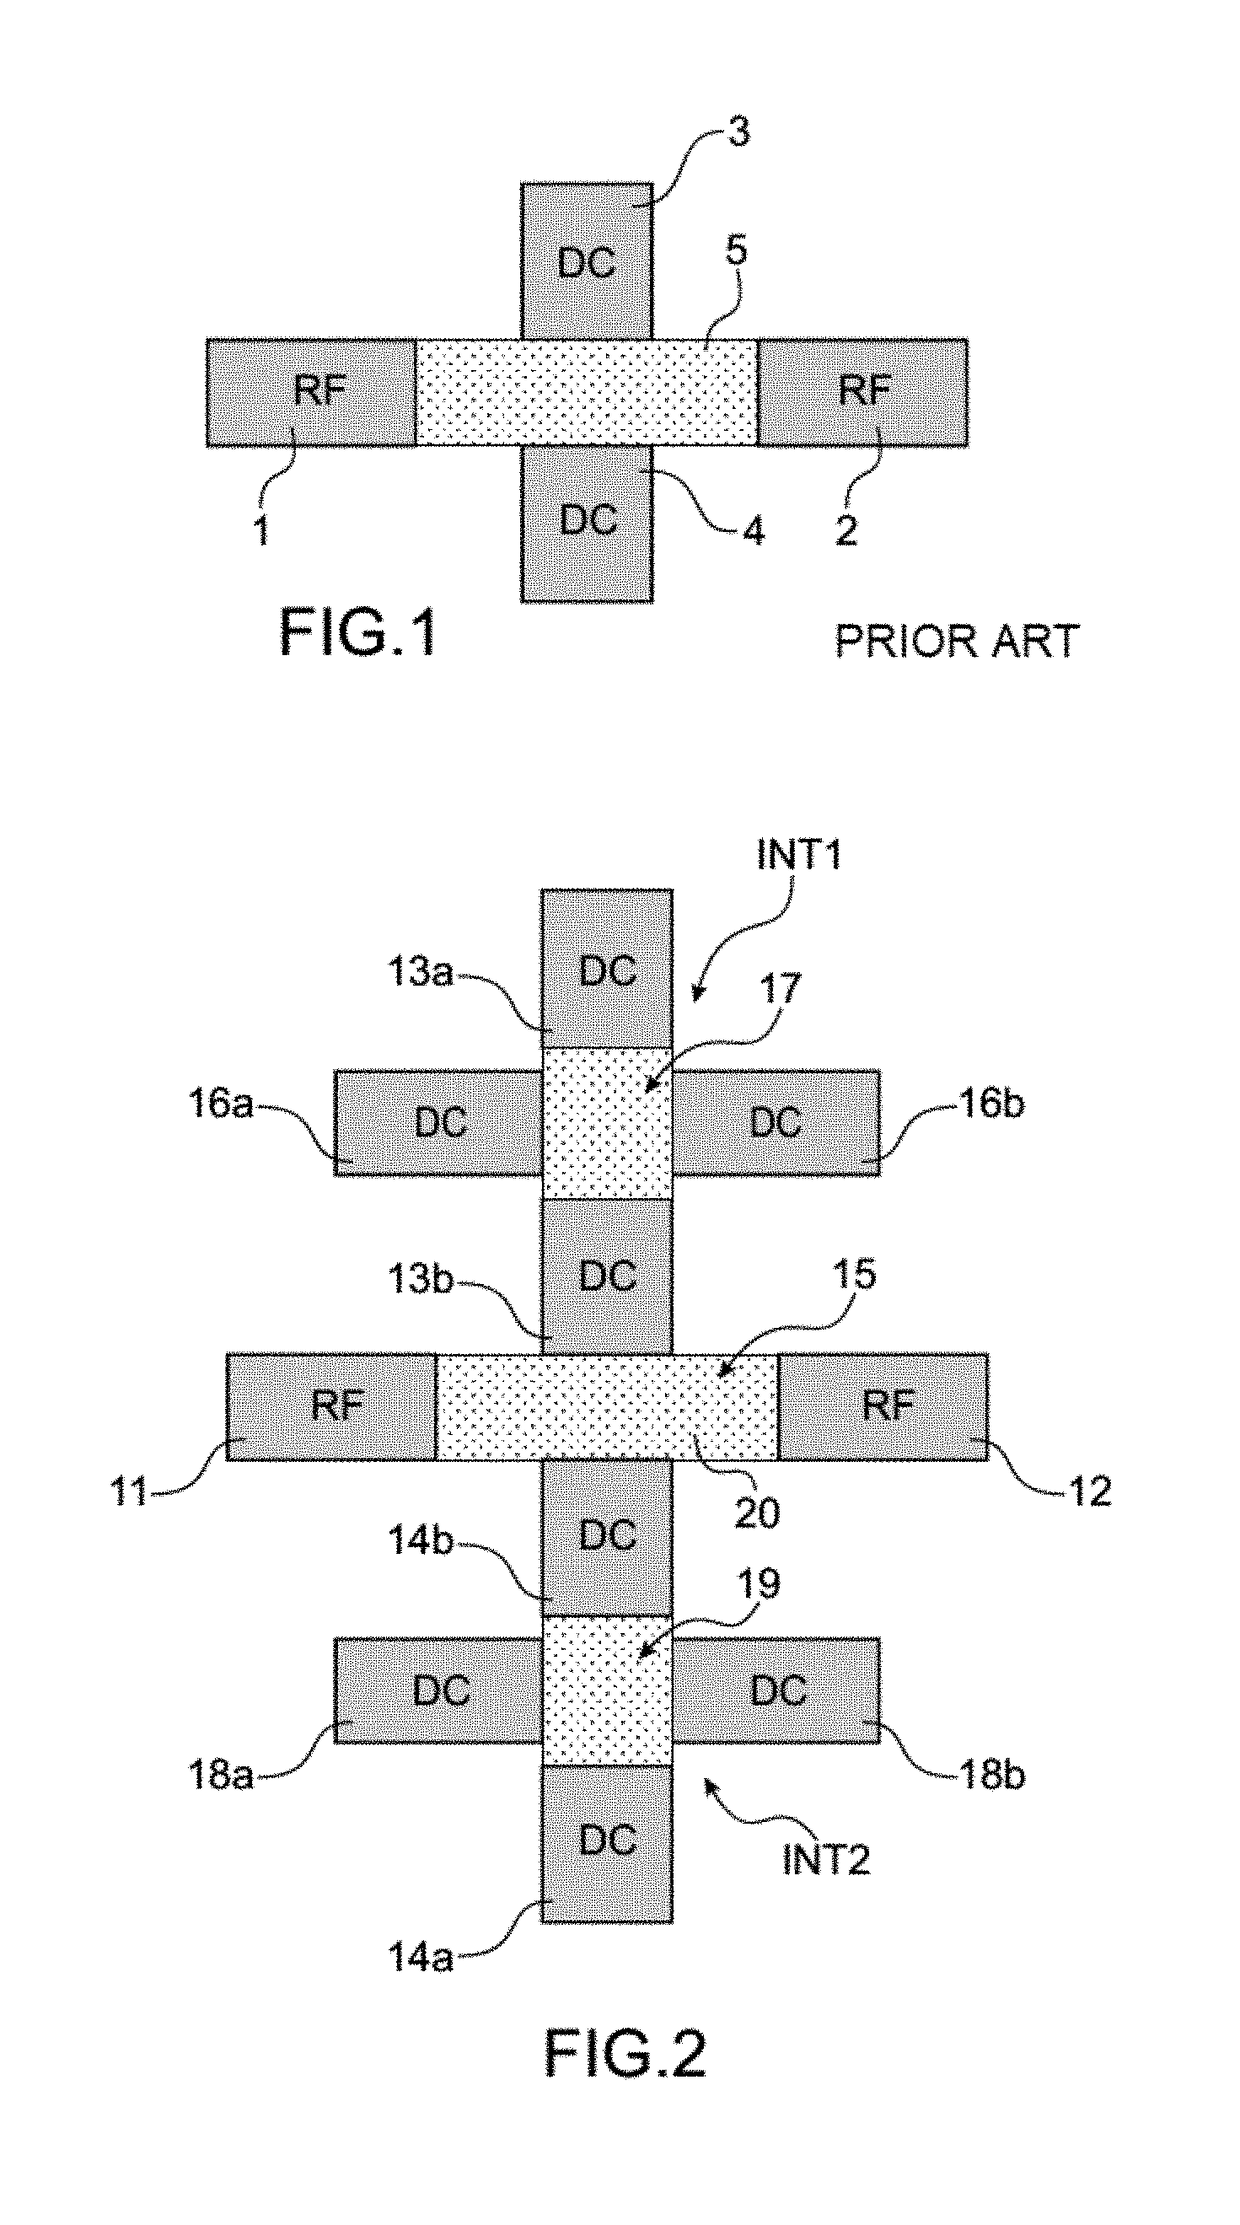 Rf/dc decoupling system for RF switches based on phase change material